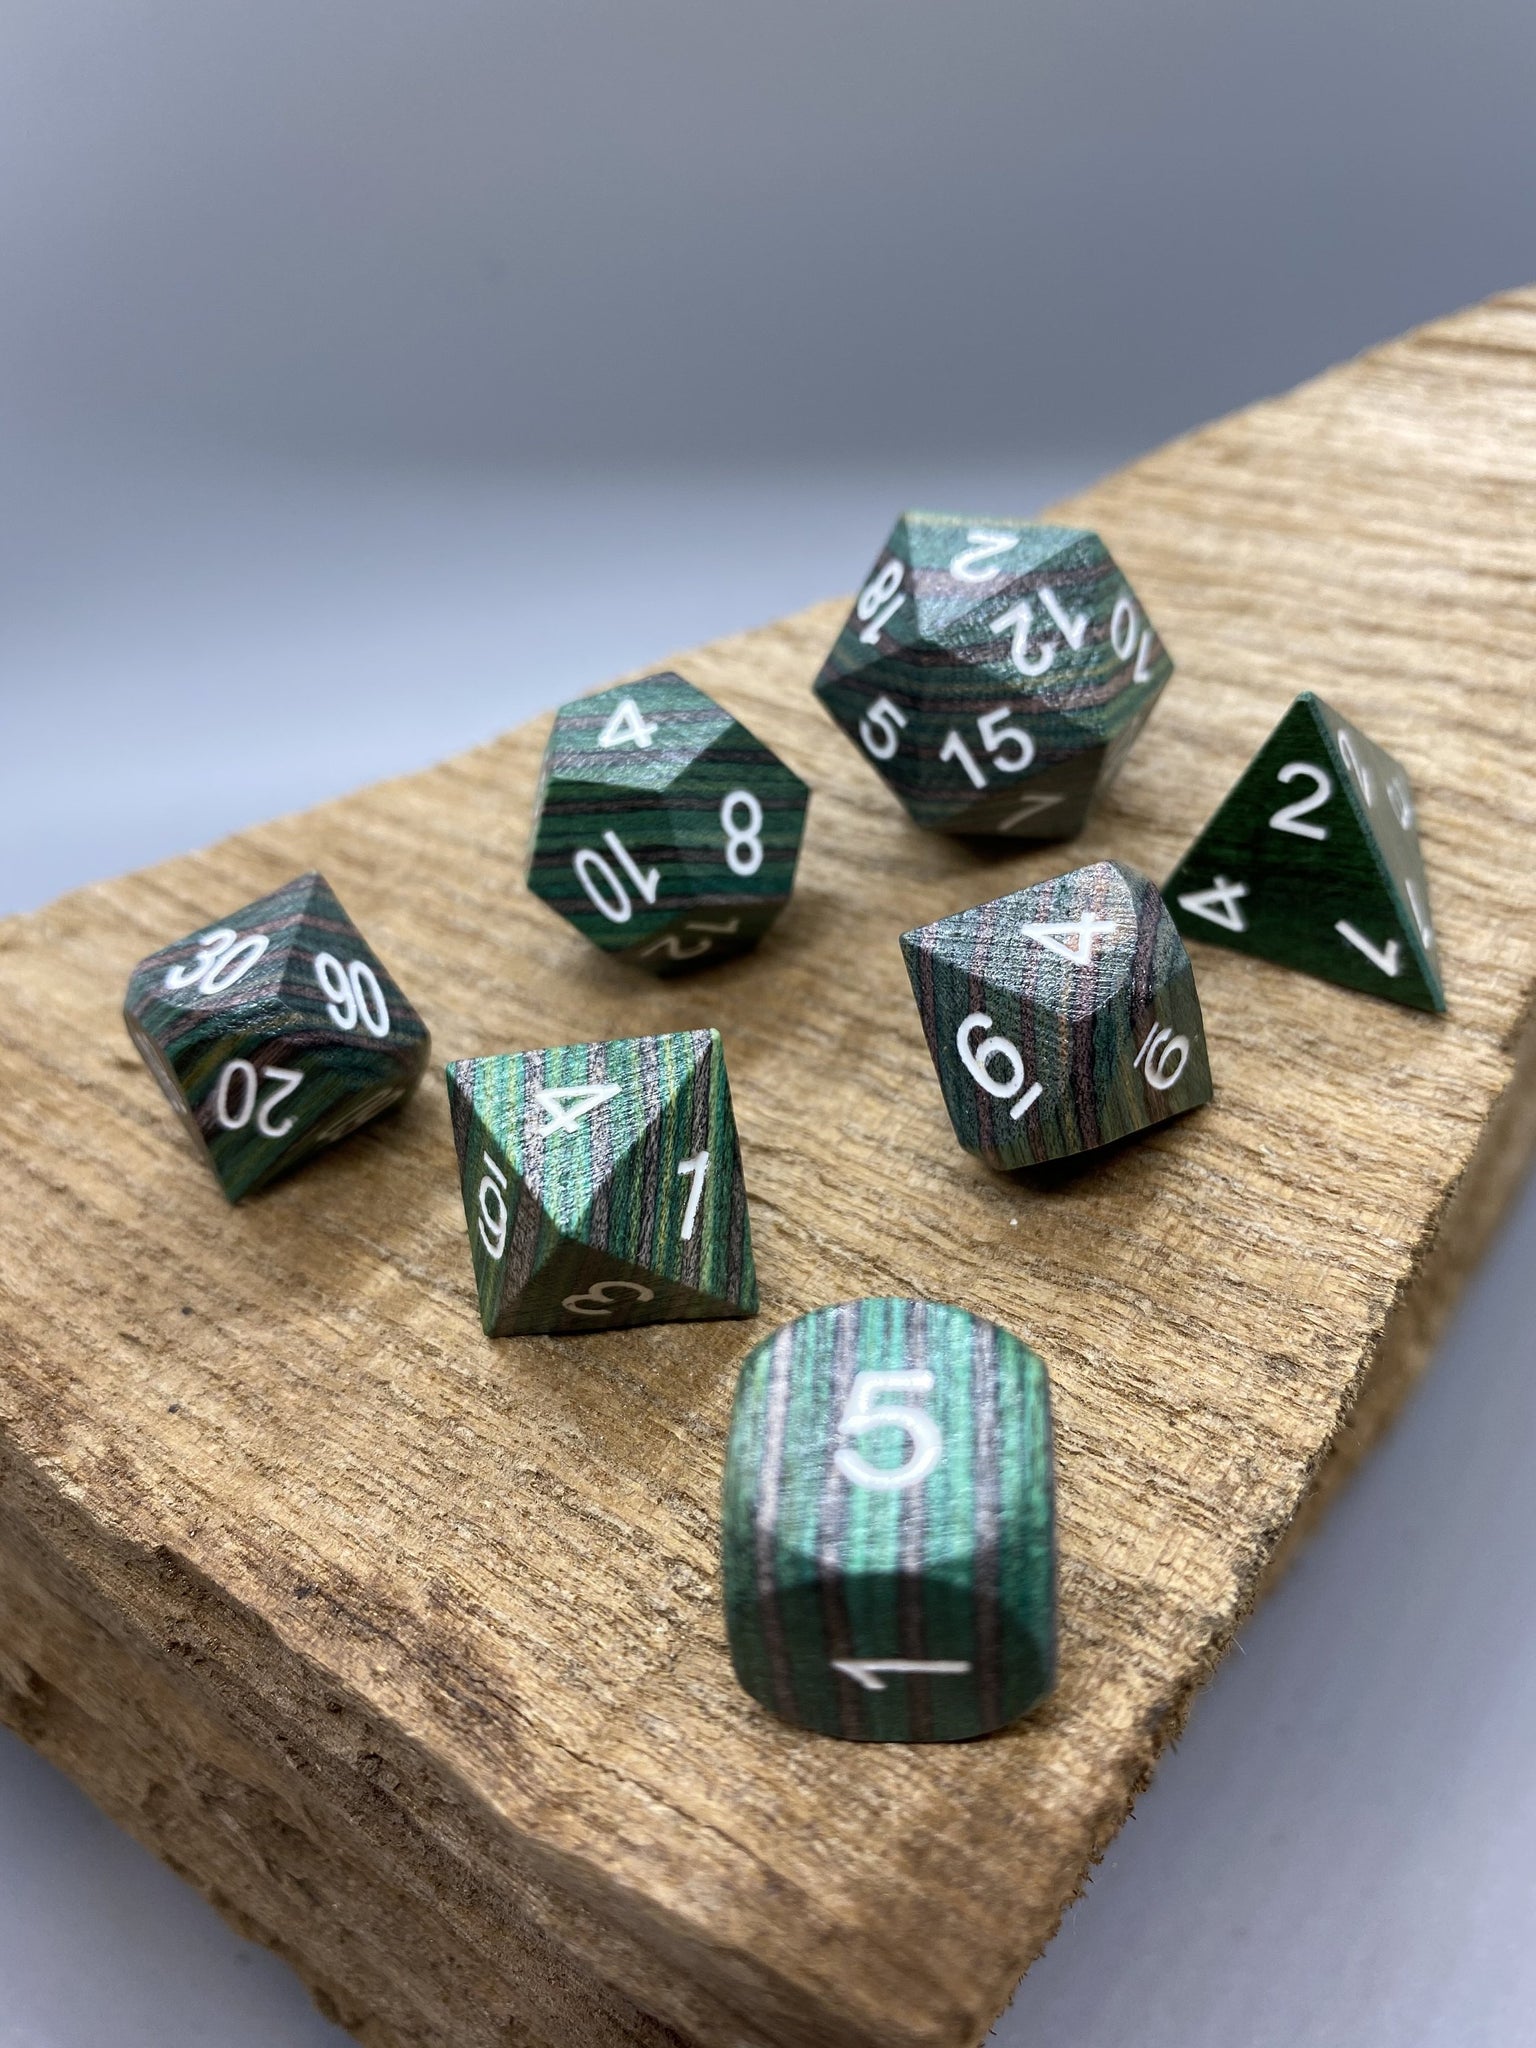 Green and Gray Wood Polyhedral Dice Set.   Complete set. - BeausBricks